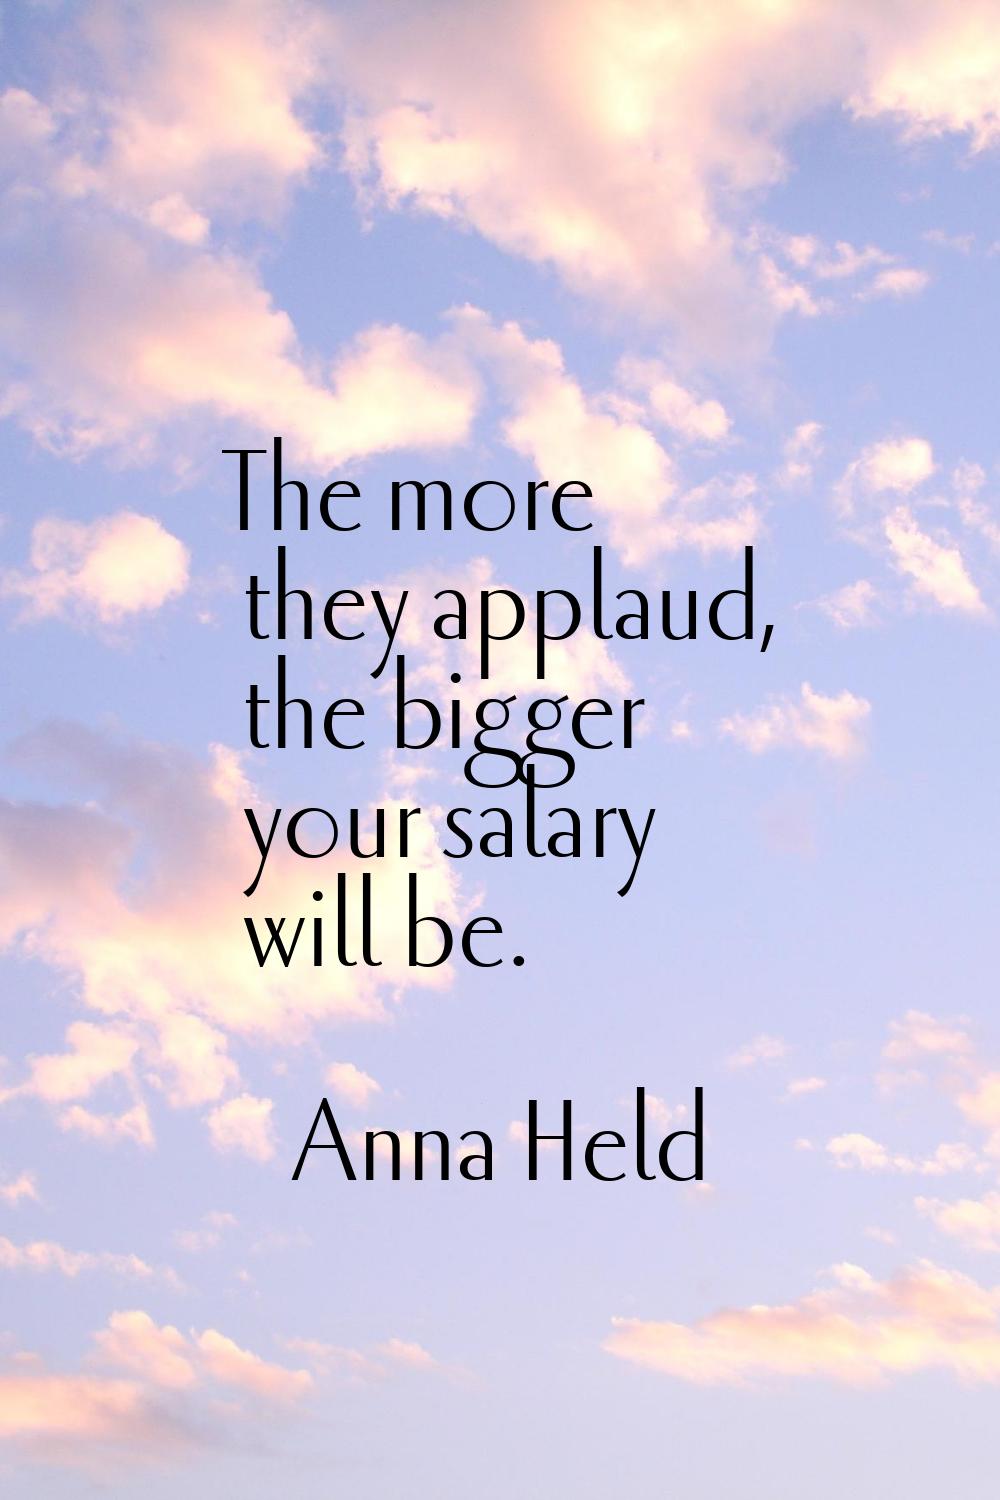 The more they applaud, the bigger your salary will be.